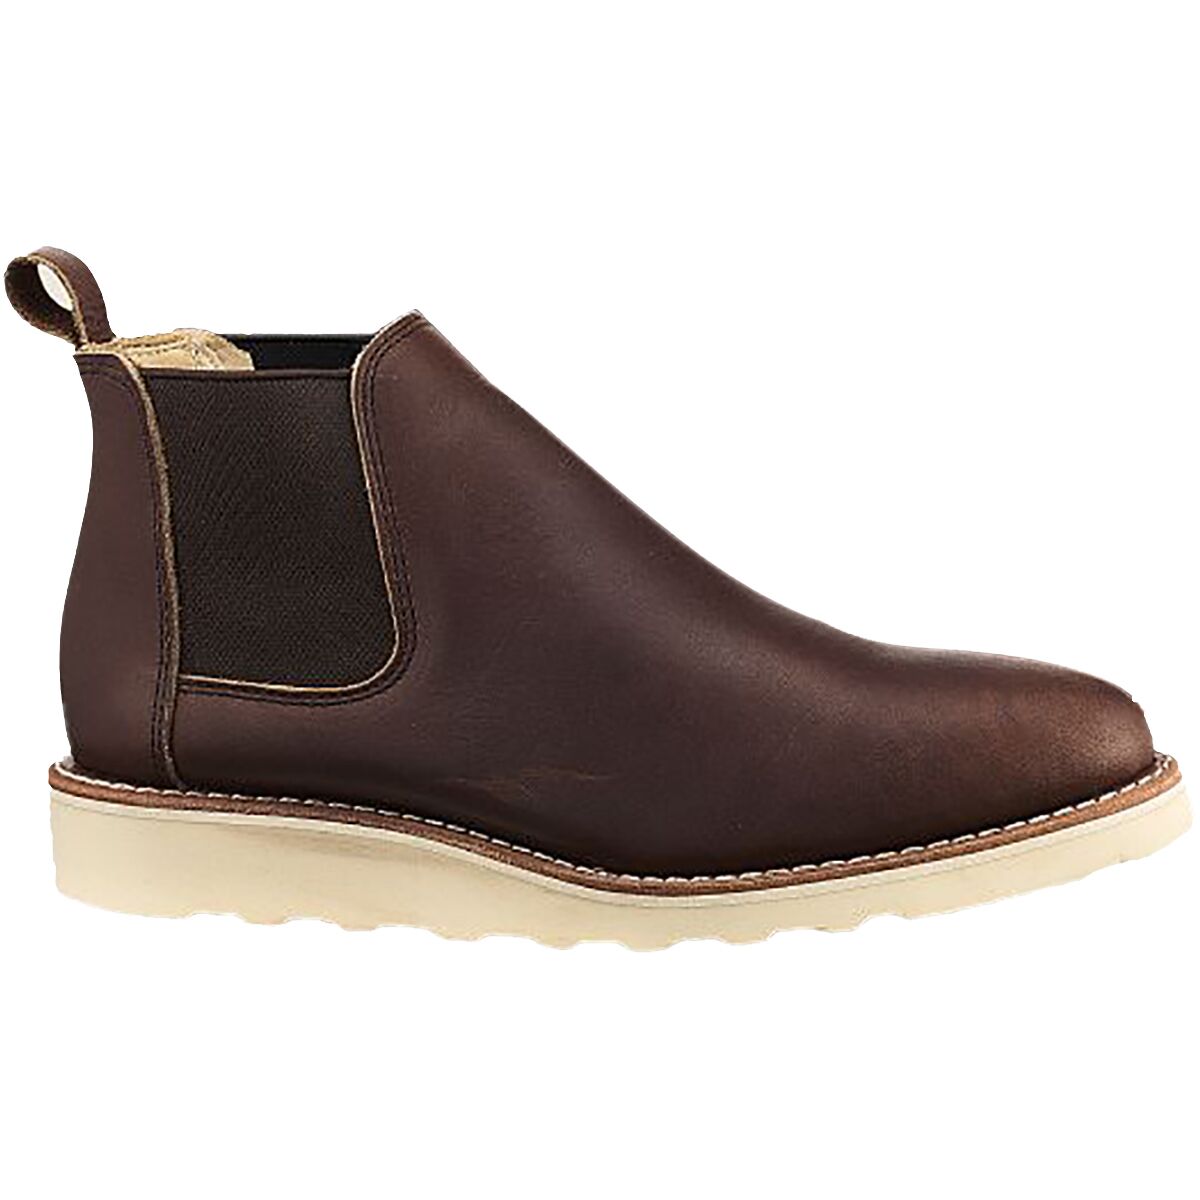 Red Wing Heritage Classic Chelsea Boot - Women's